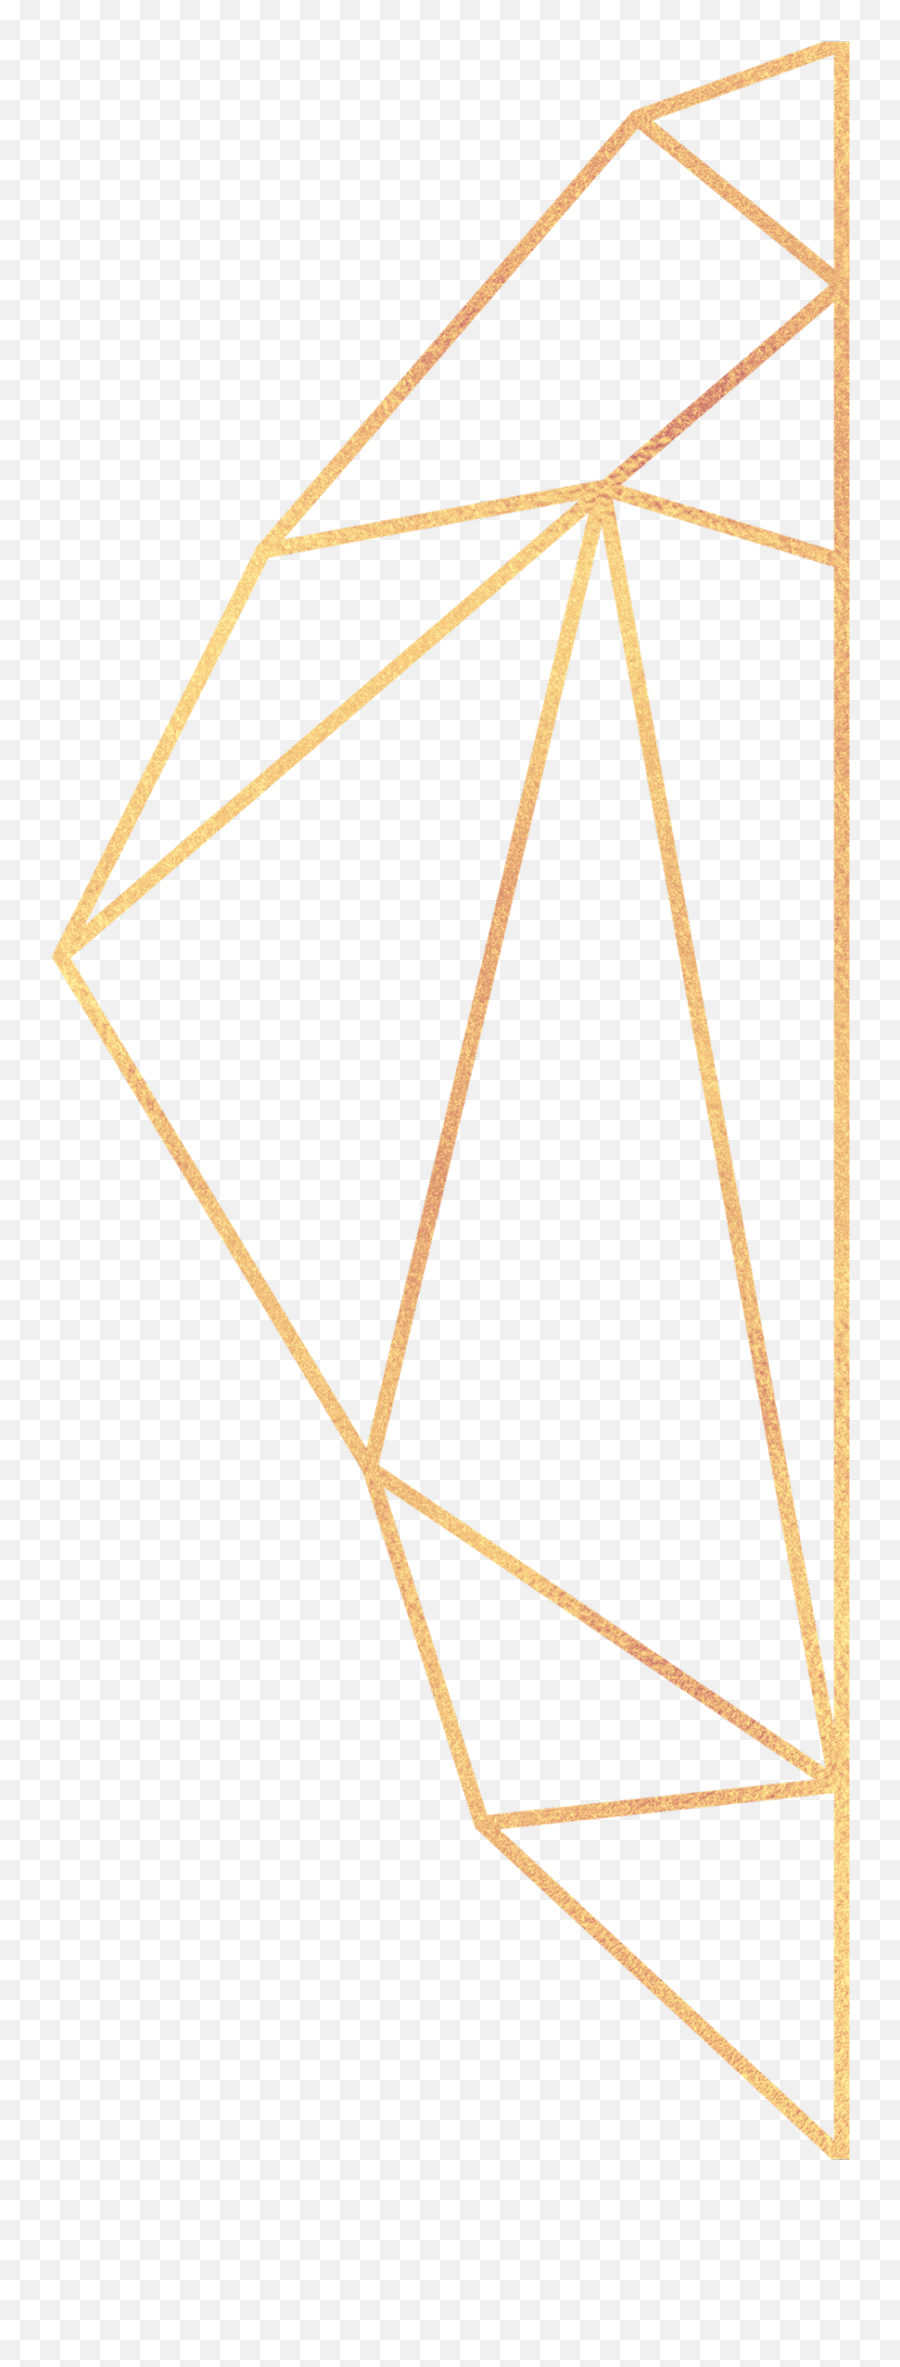 Gold Lines - Geometric Shapes In Gold Emoji,Gold Lines Png